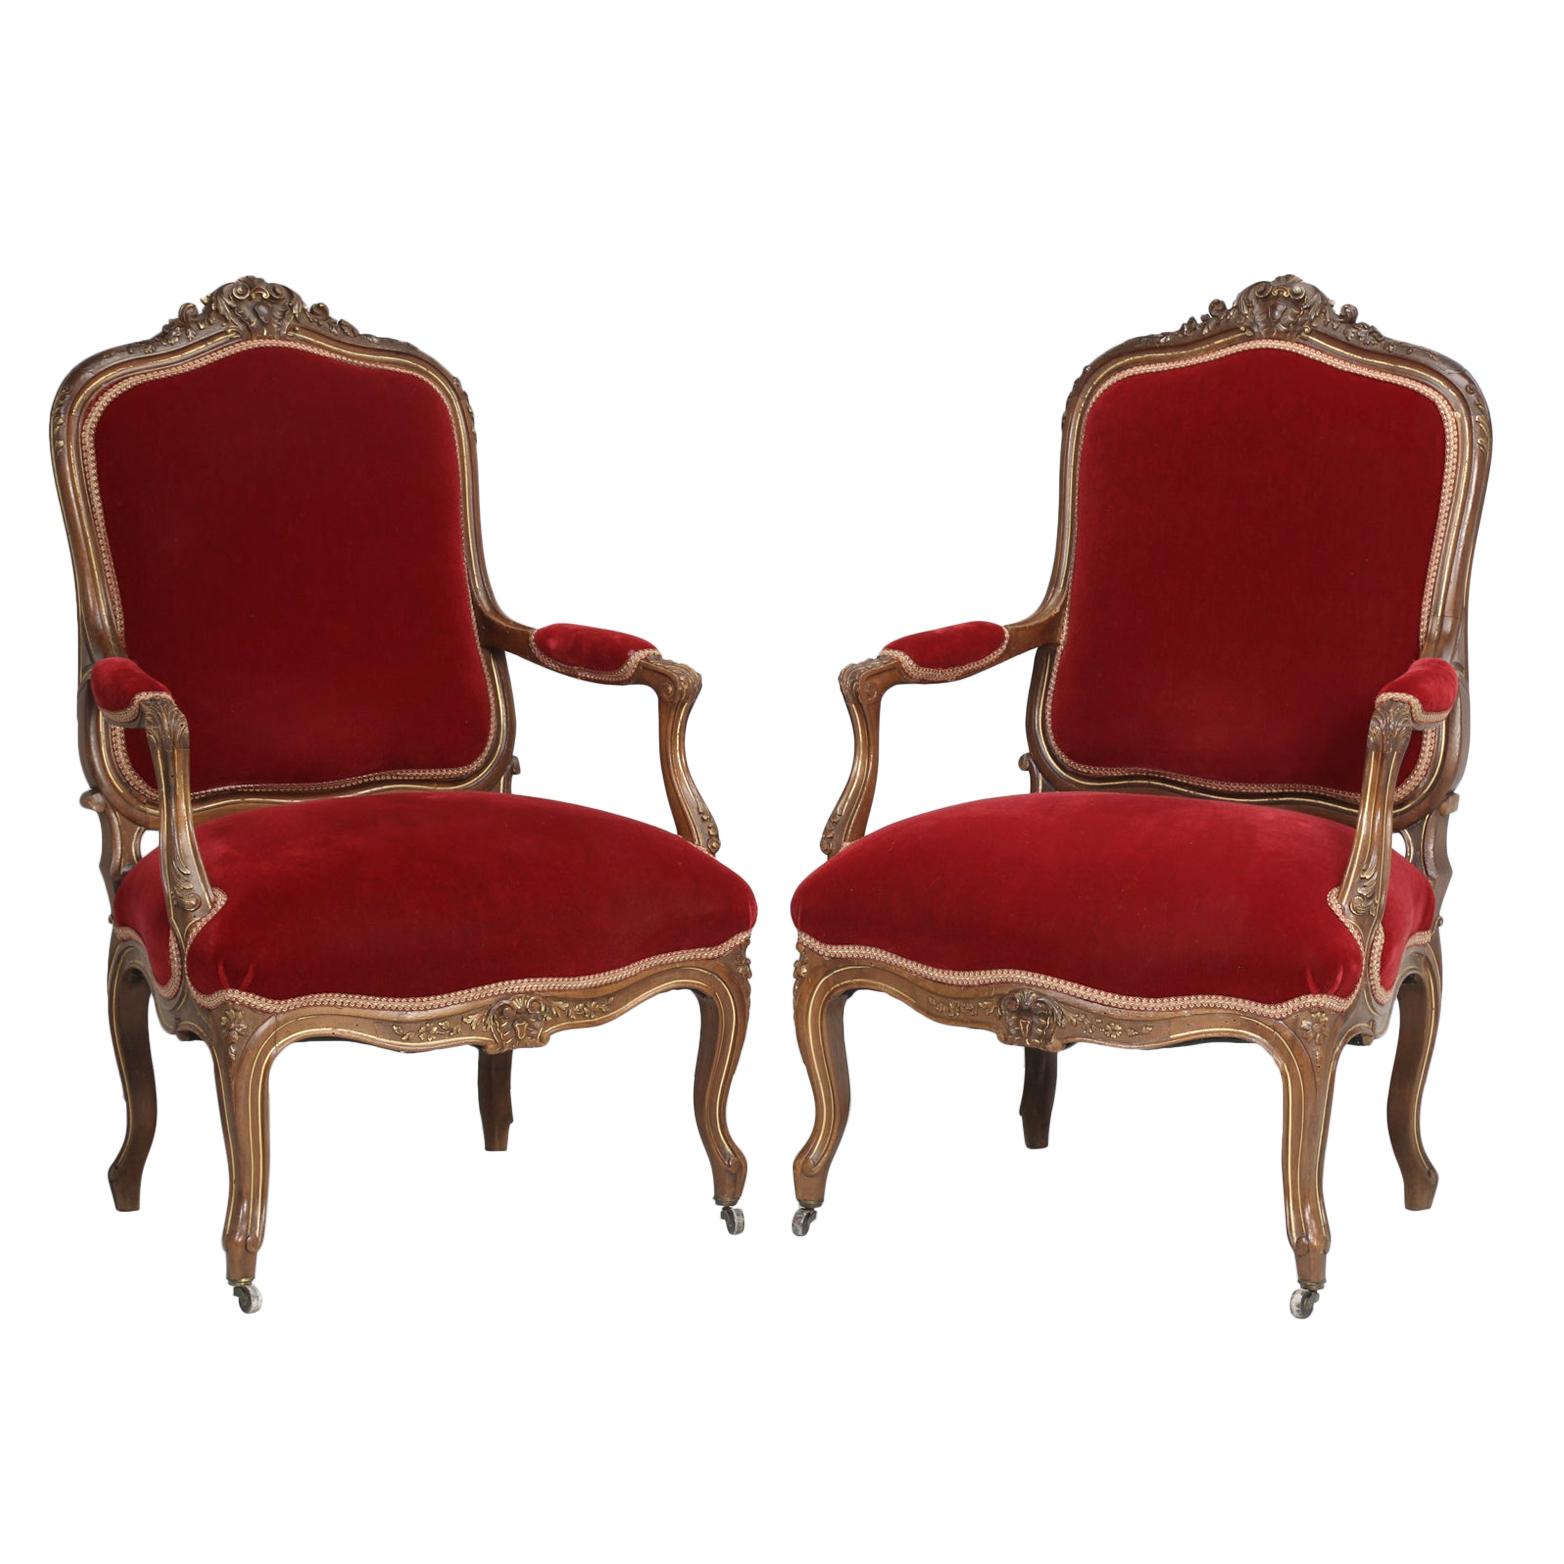 Pair of Antique Italian Parlor Armchairs in Louis XV Style Walnut Carved Frames